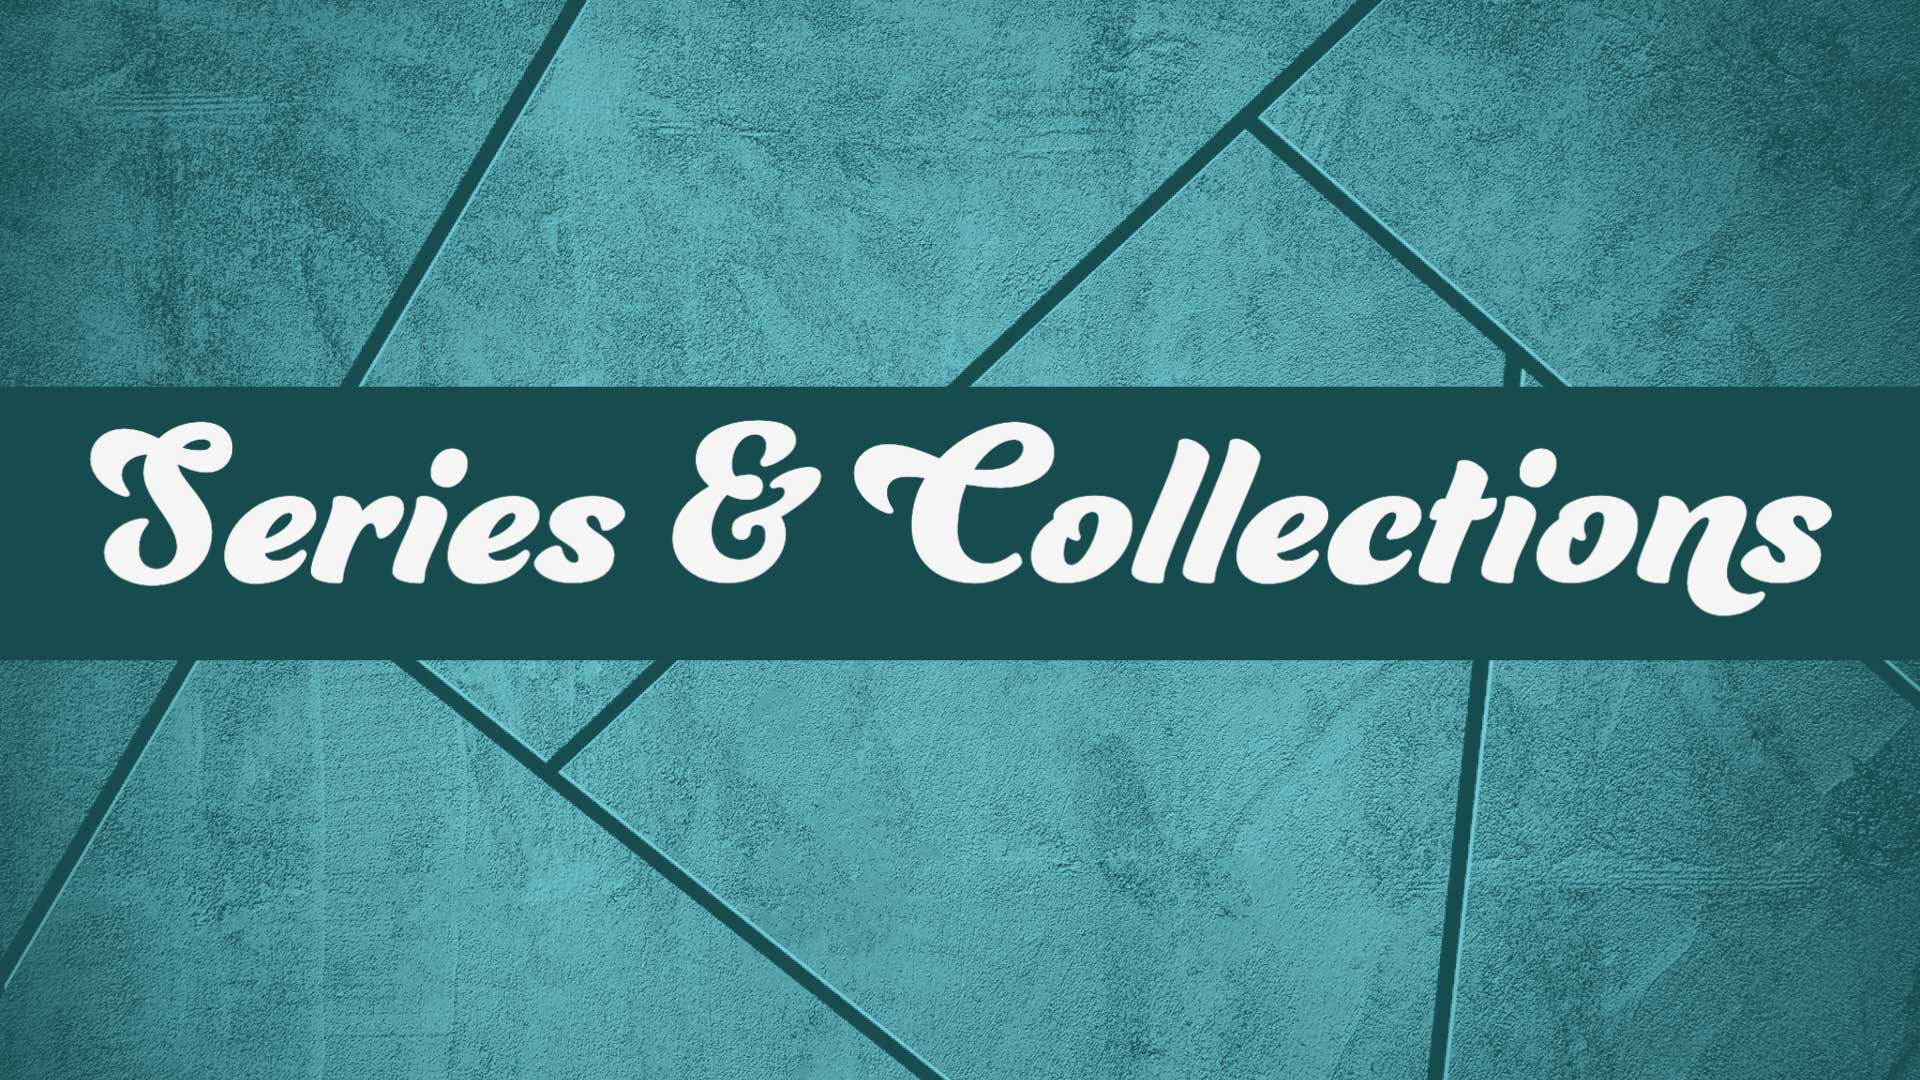 Series & Collections